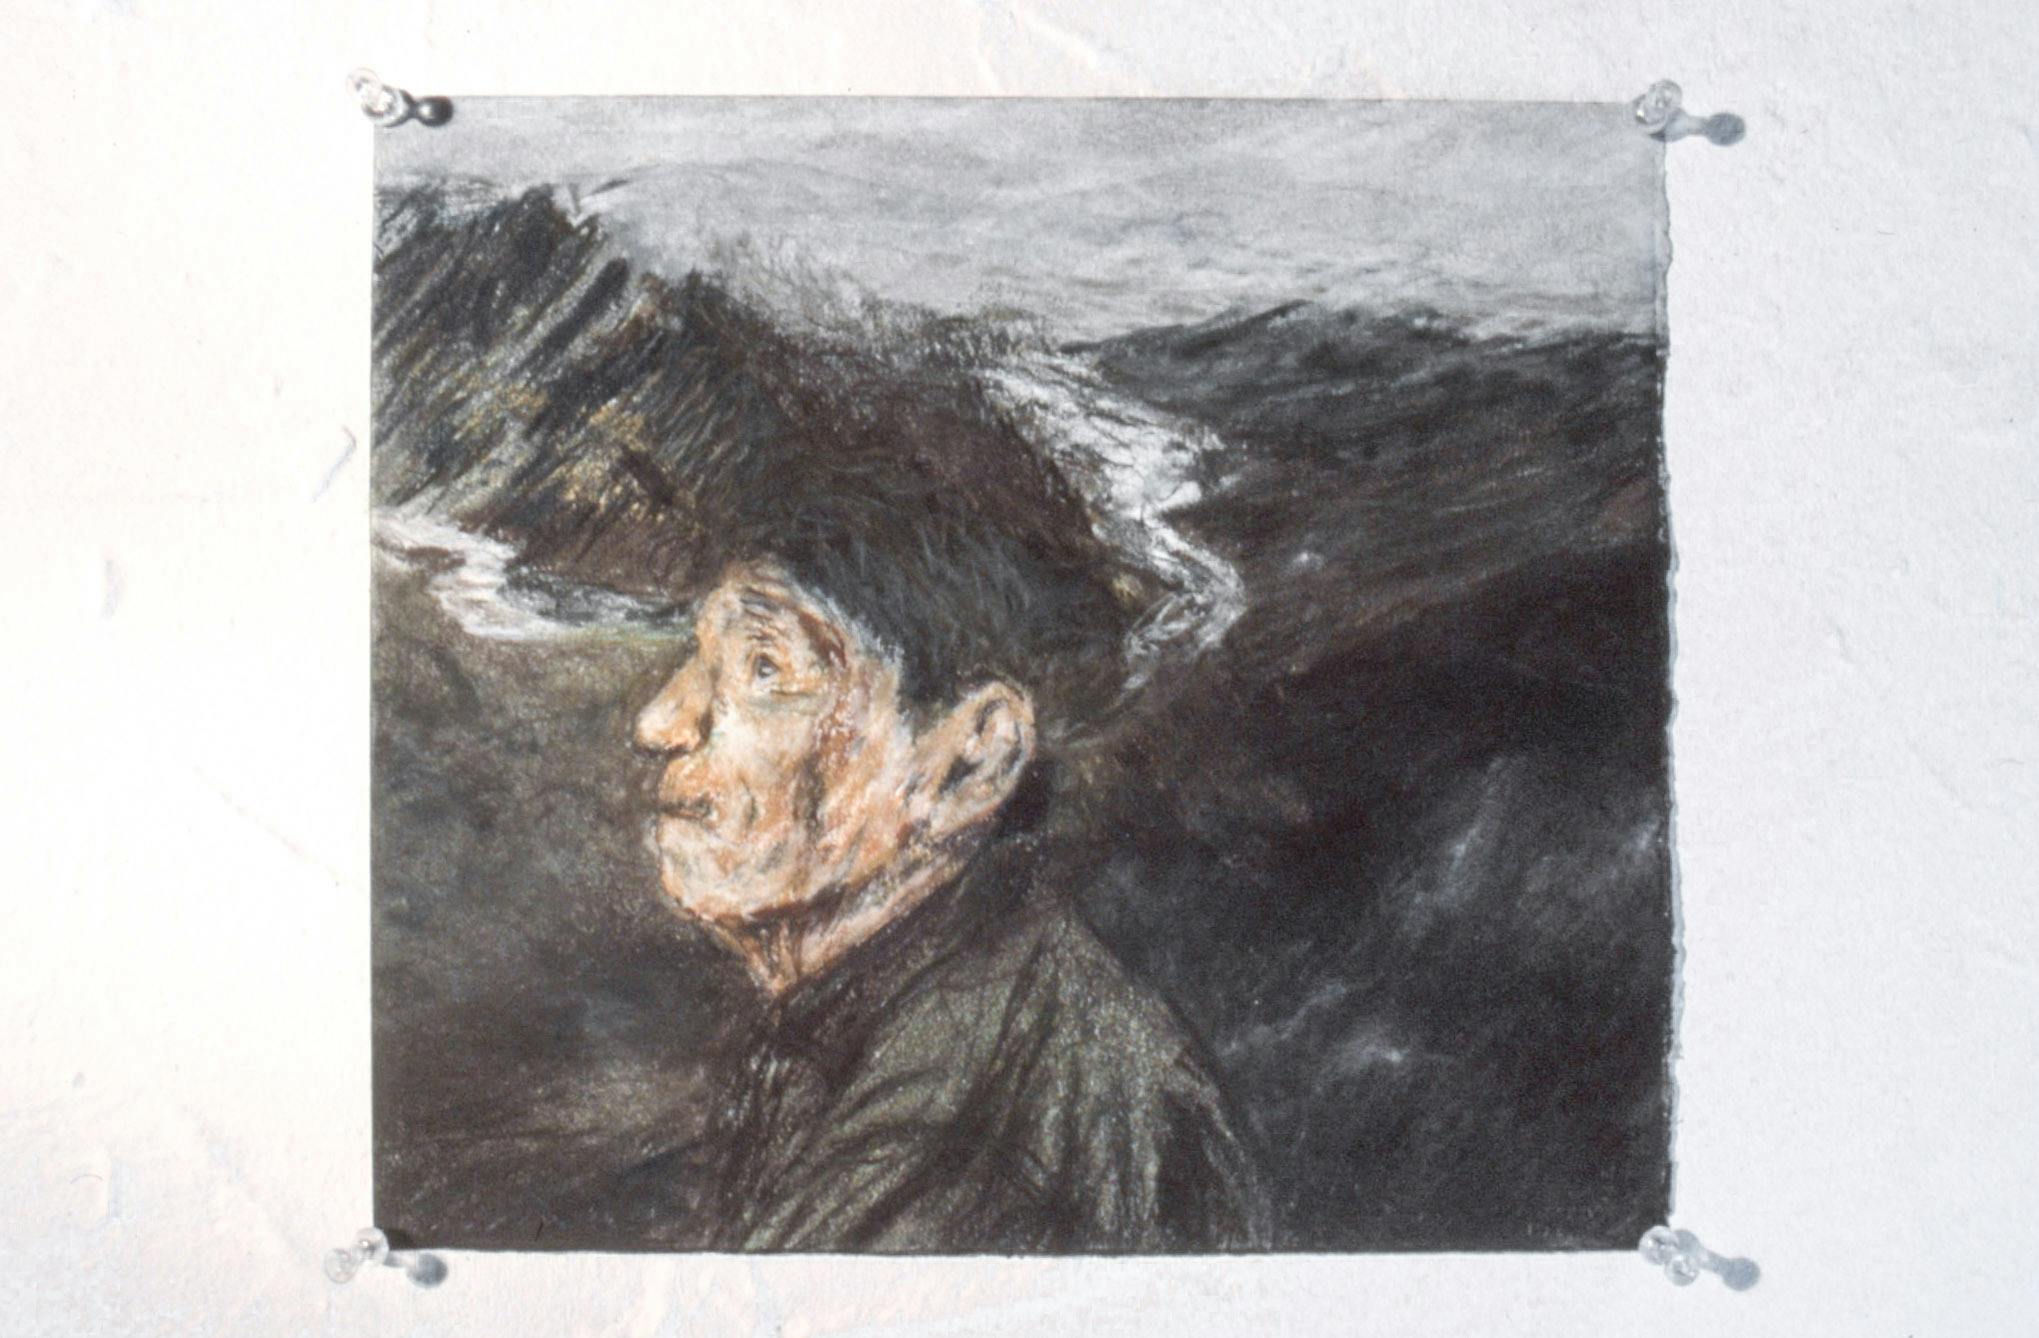 A closeup of a small pastel drawing, pinned to the wall with clear tacks. The drawing shows an elder person with dark hair and tan skin in front of a snowy mountain range.  